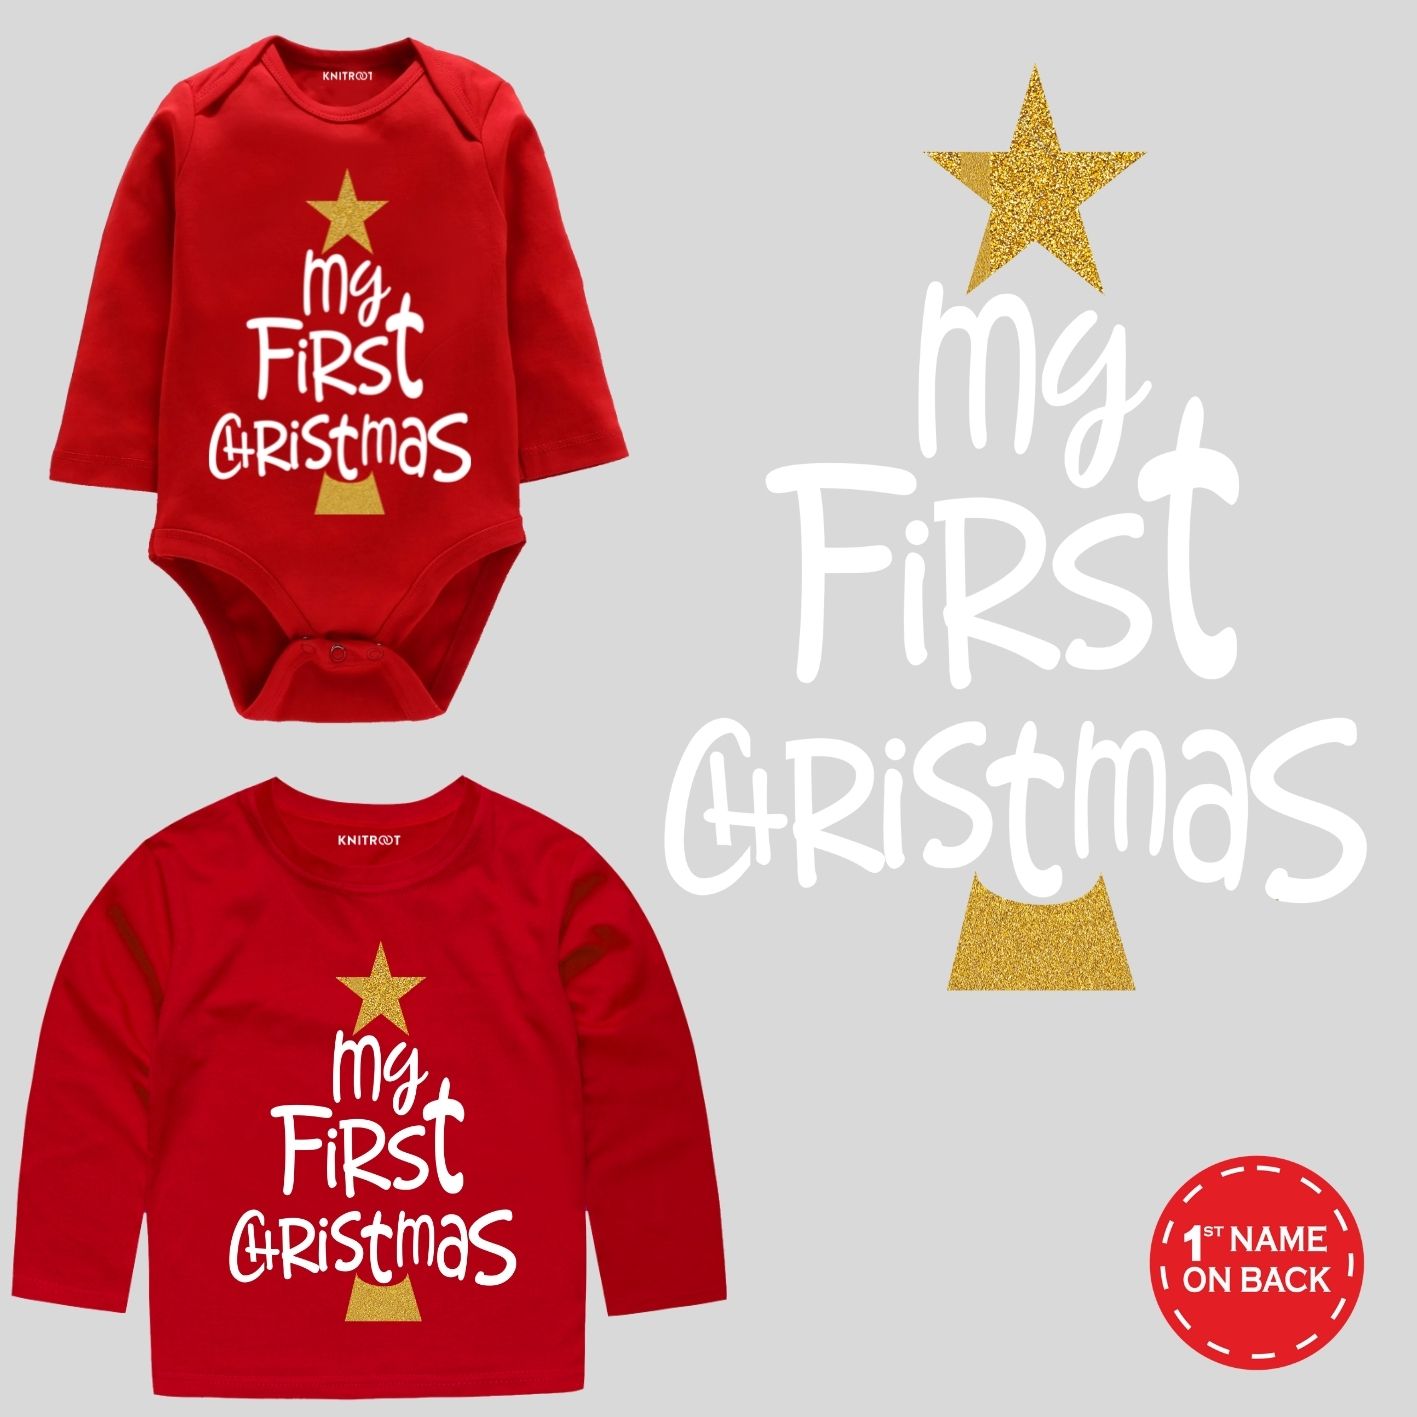 My first christmas | baby wear for christmas | baby's first christmas outfit